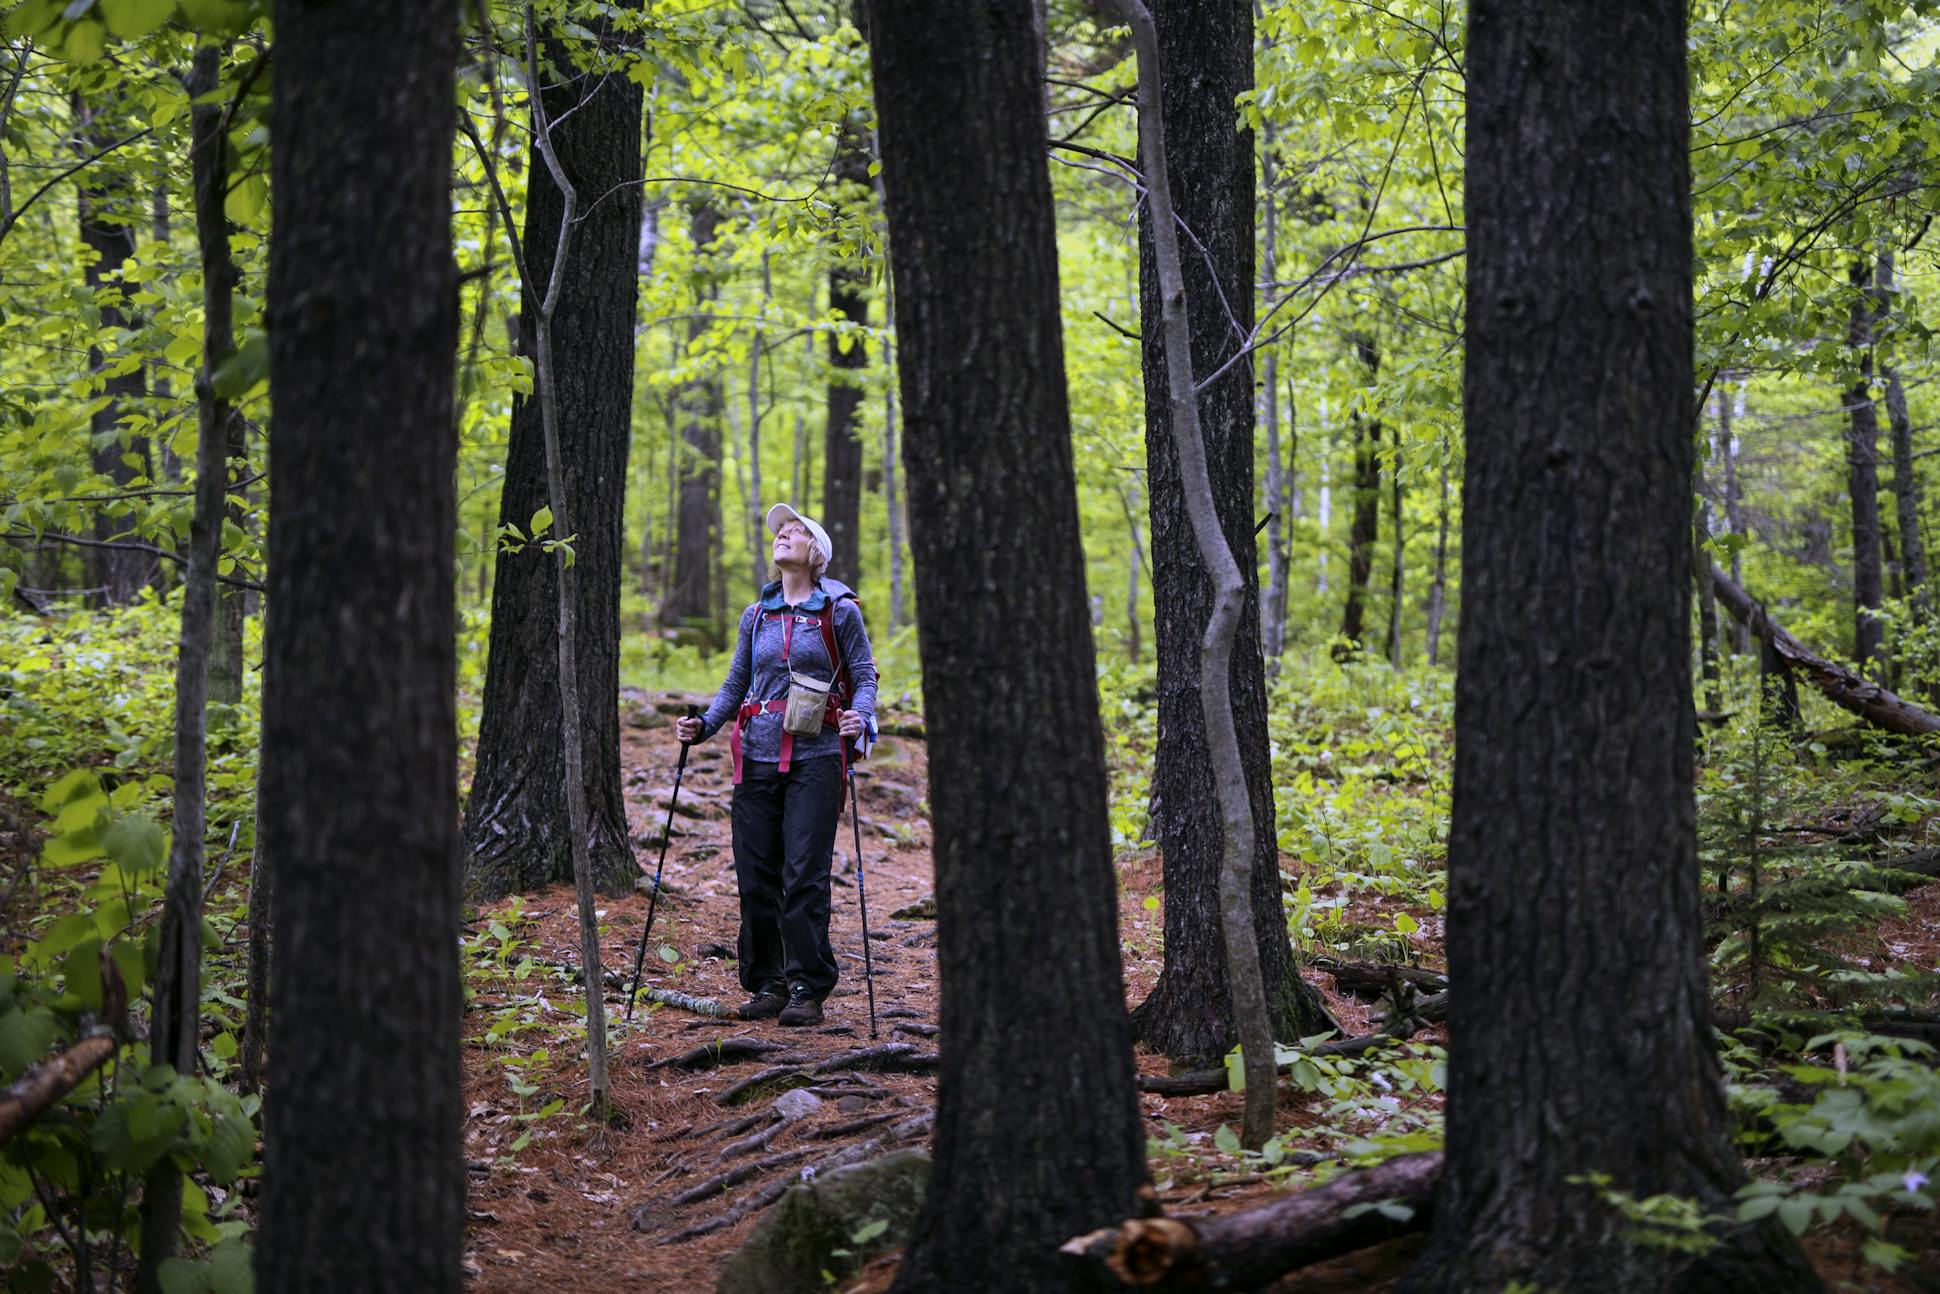 Just days into her thru-hike, Melanie Radzicki McManus paused to take in the beauty in the Magney-Snively Natural Area in Duluth.